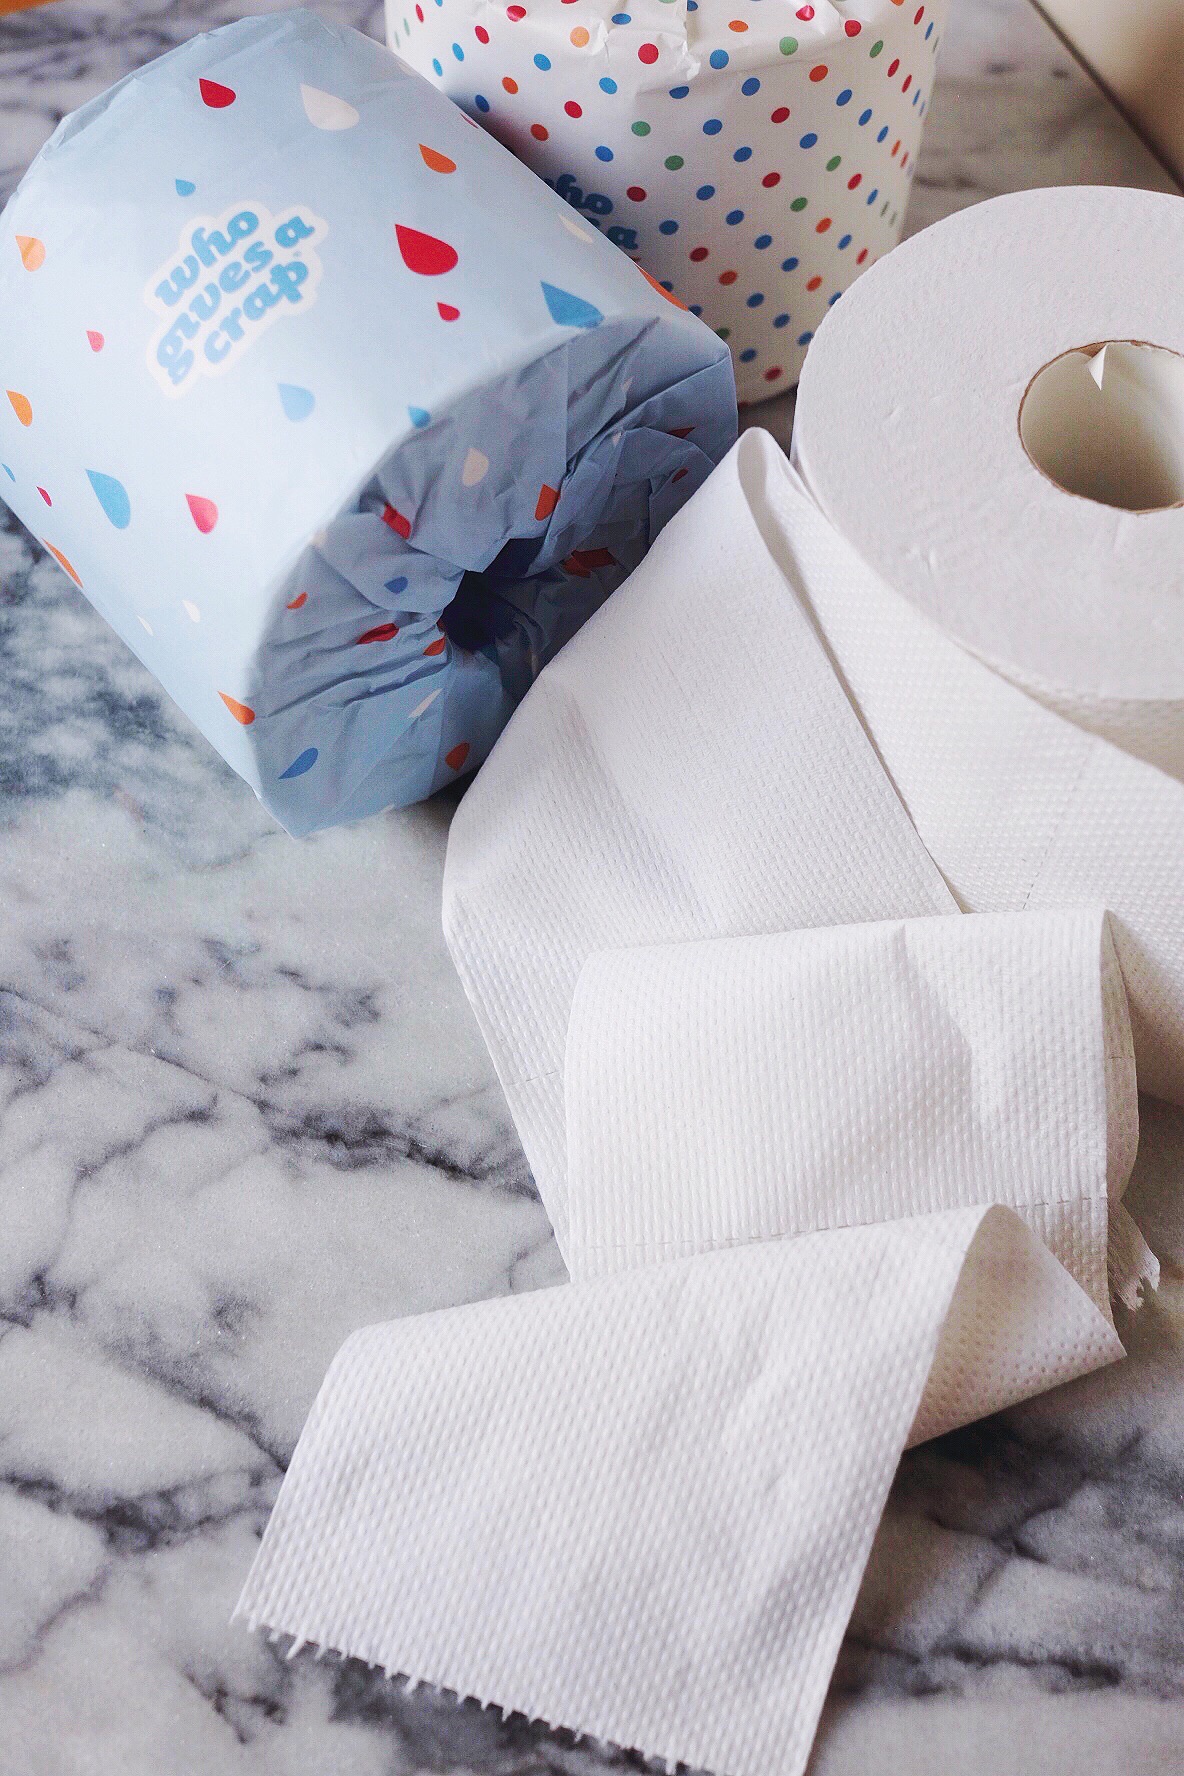 Bamboo vs. Recycled Toilet Paper: Which is Better?